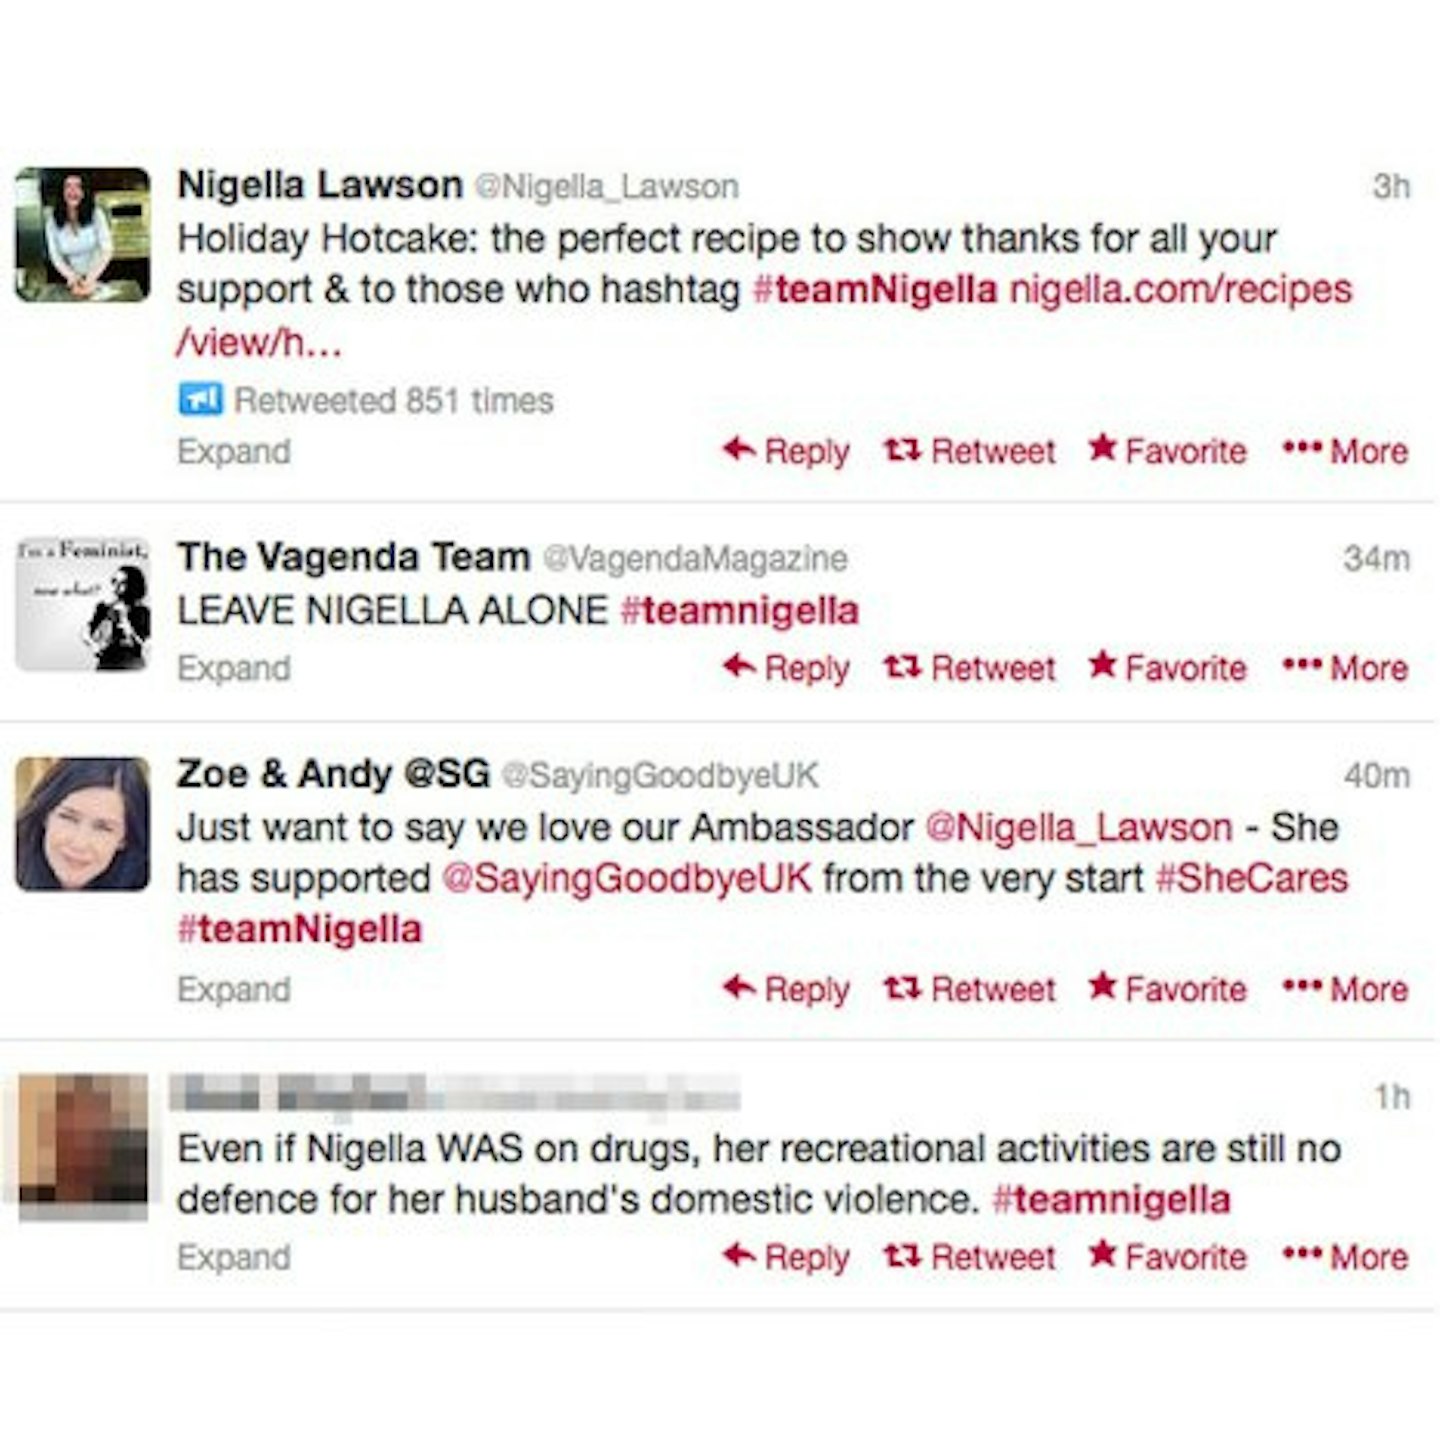 Nigella's tweet, followed by the support of other hashtaggers